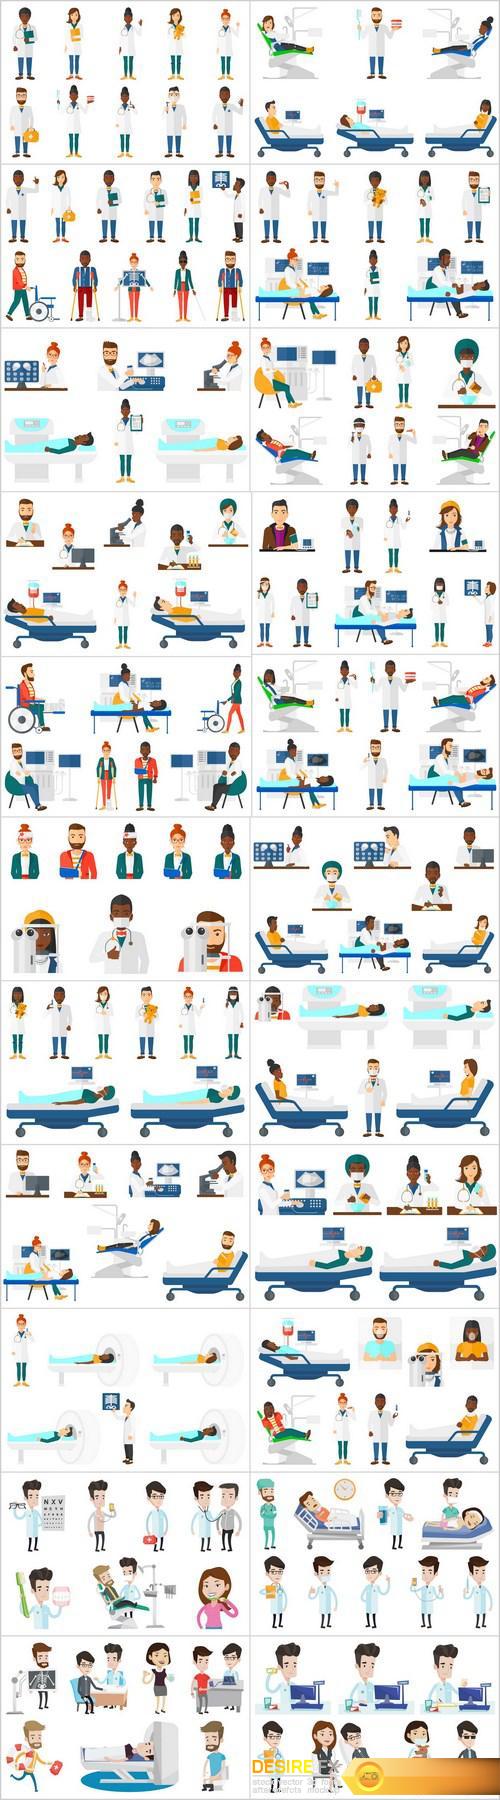 Doctor characters and patients - 24xEPS Vector Stock